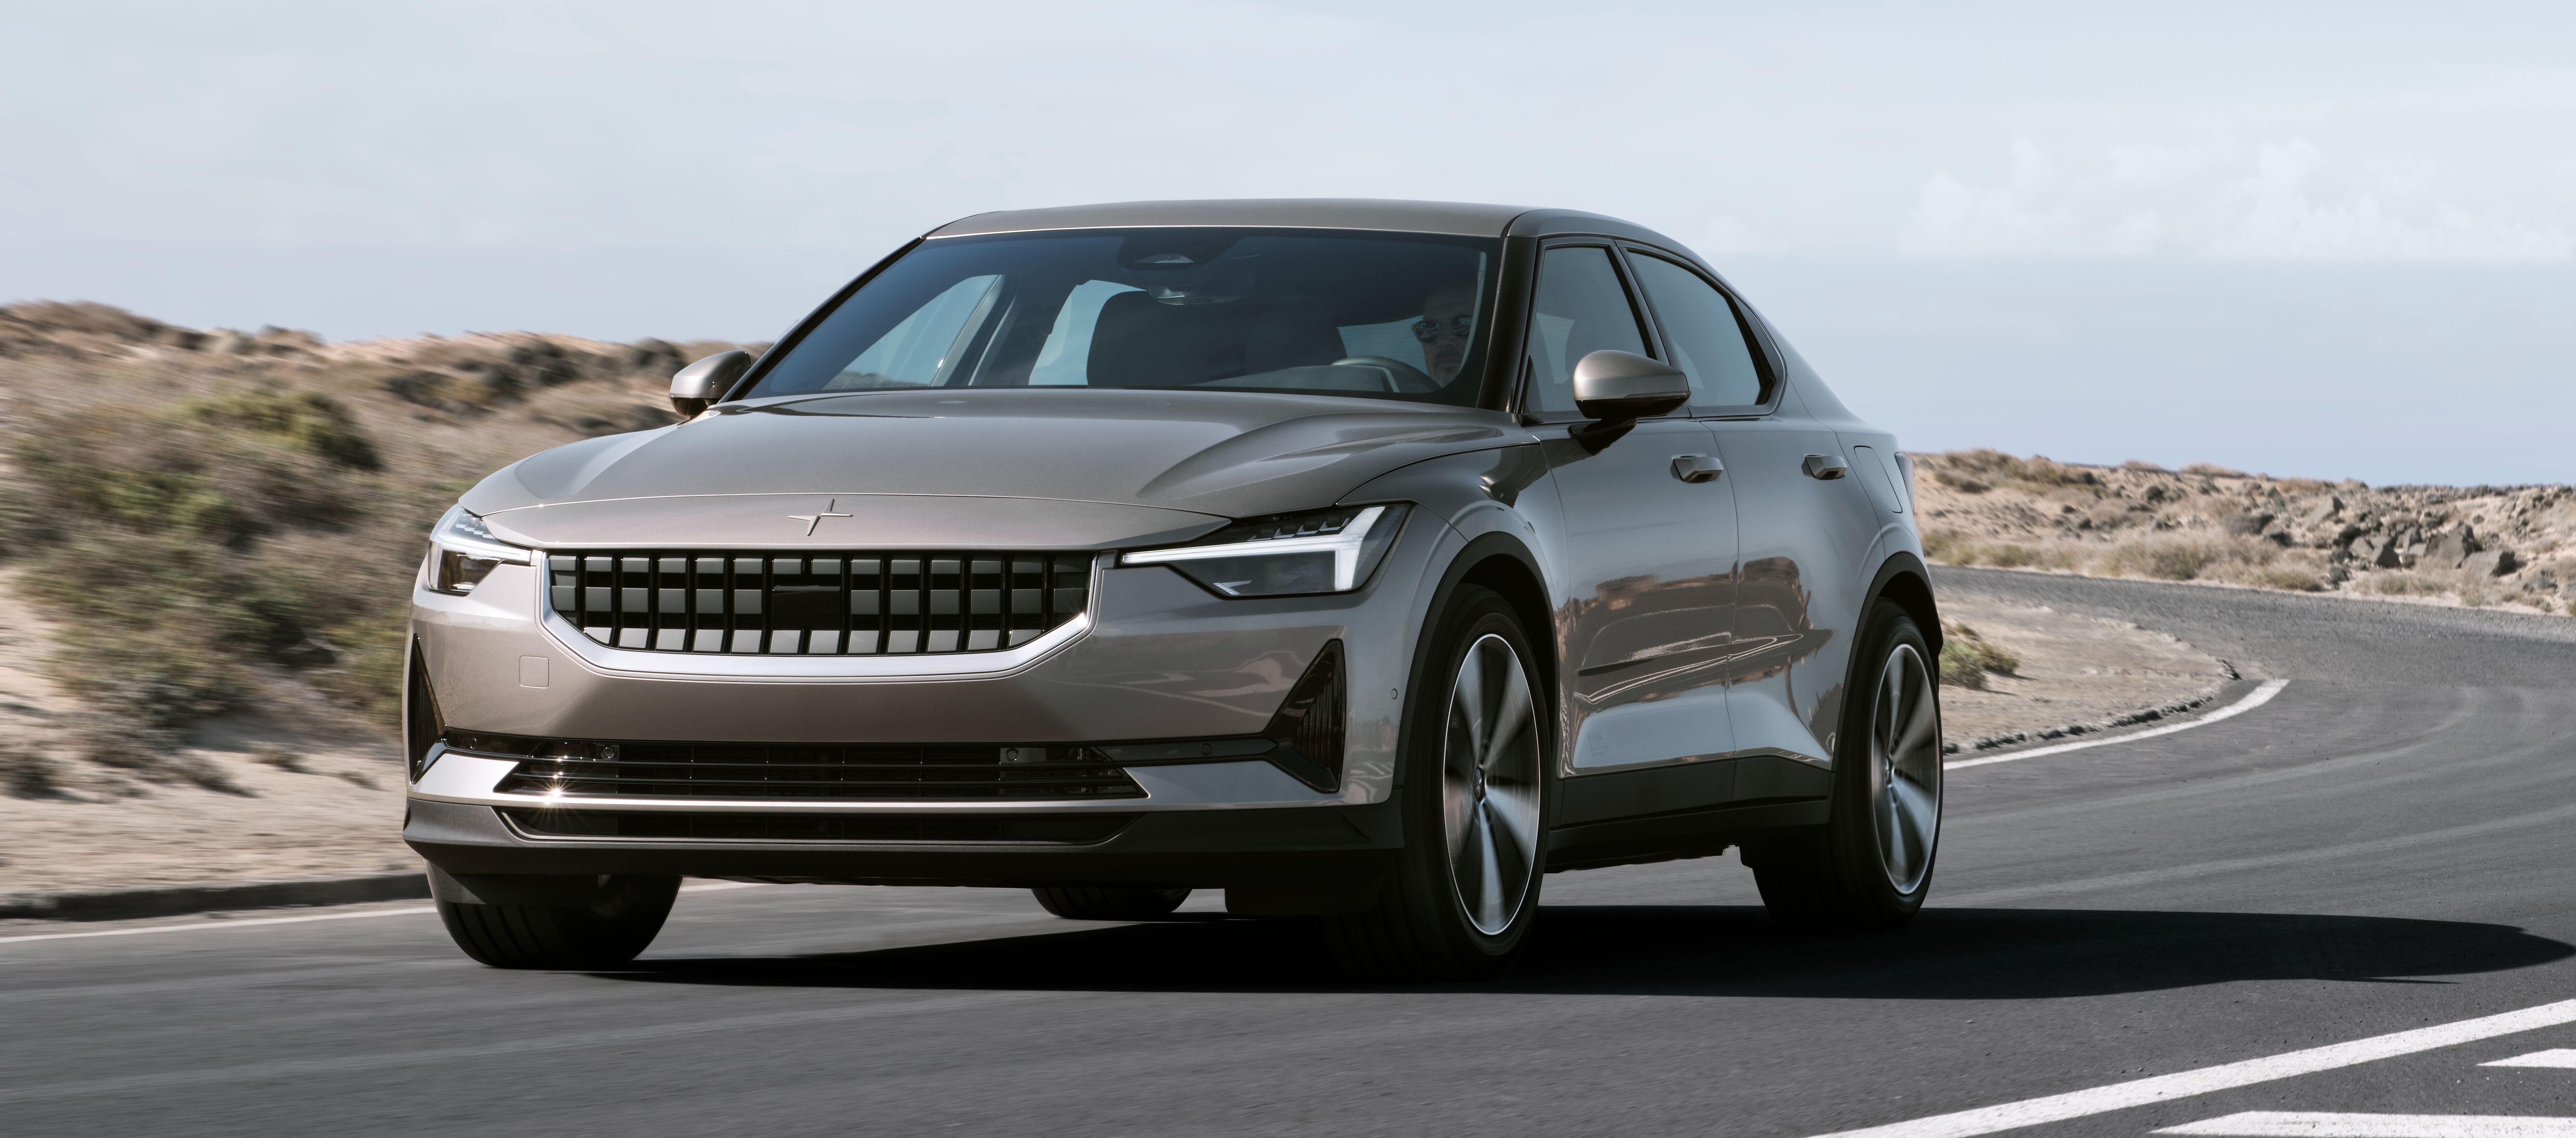 Polestar 2 electric car gets update with cheaper and longer range options,  heat pump, and more